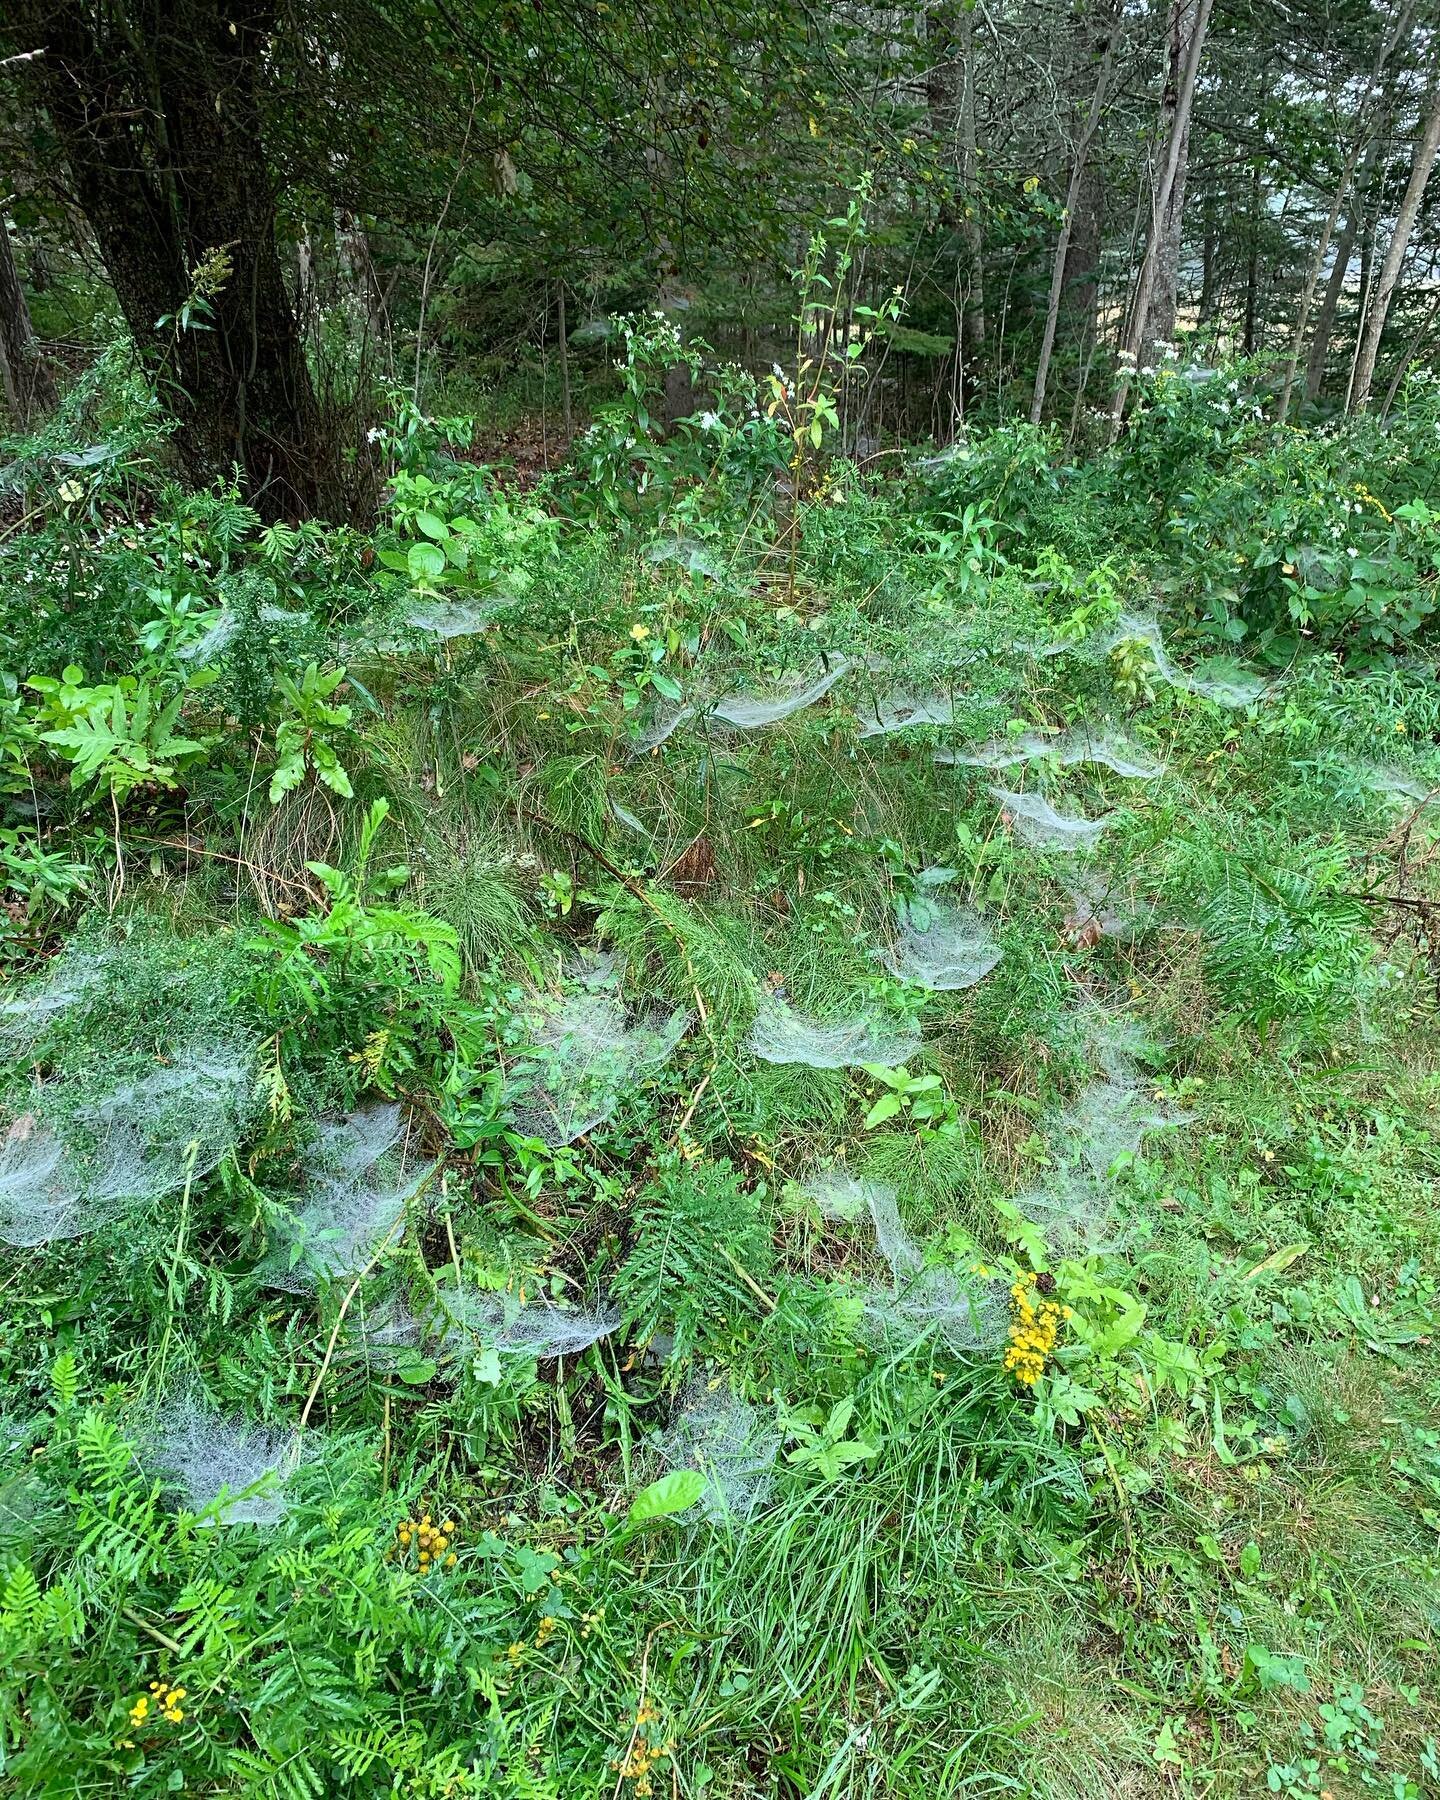 From a wet morning in Maine when the rain revealed all of the secret silken homes of the spiders.